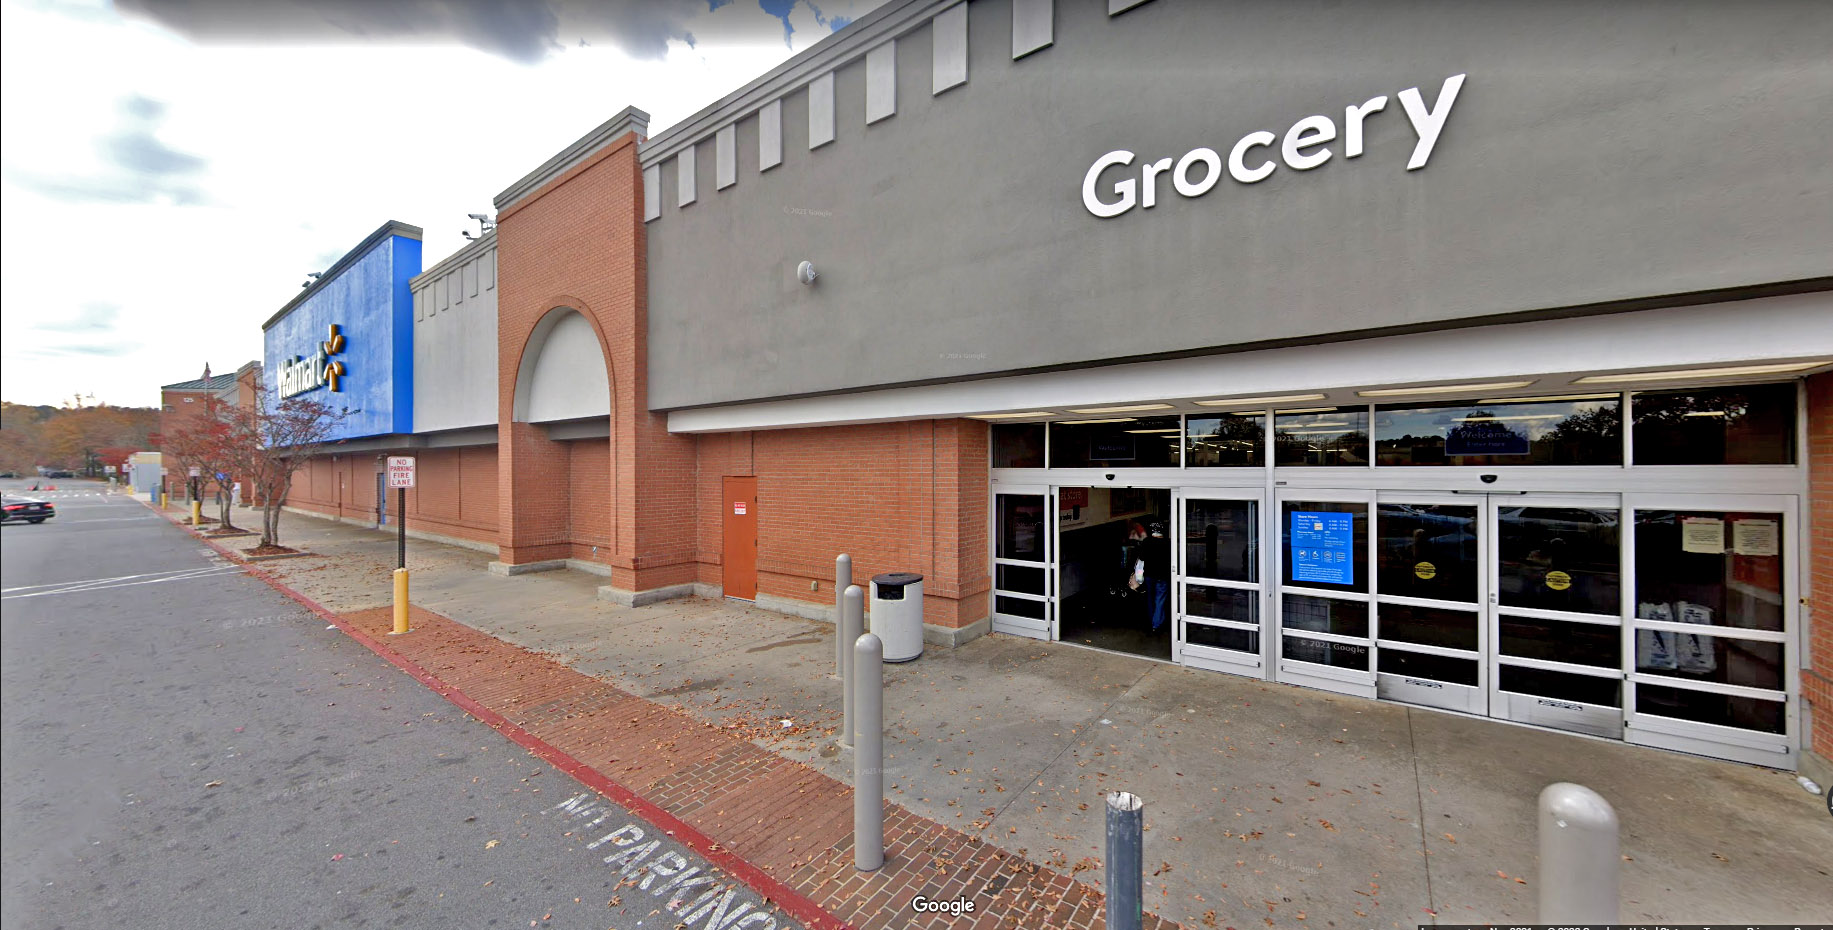 PHOTO: The Walmart Supercenter in Fayetteville, Ga. is pictured in an image from Google Maps Street view on Nov. 2021.